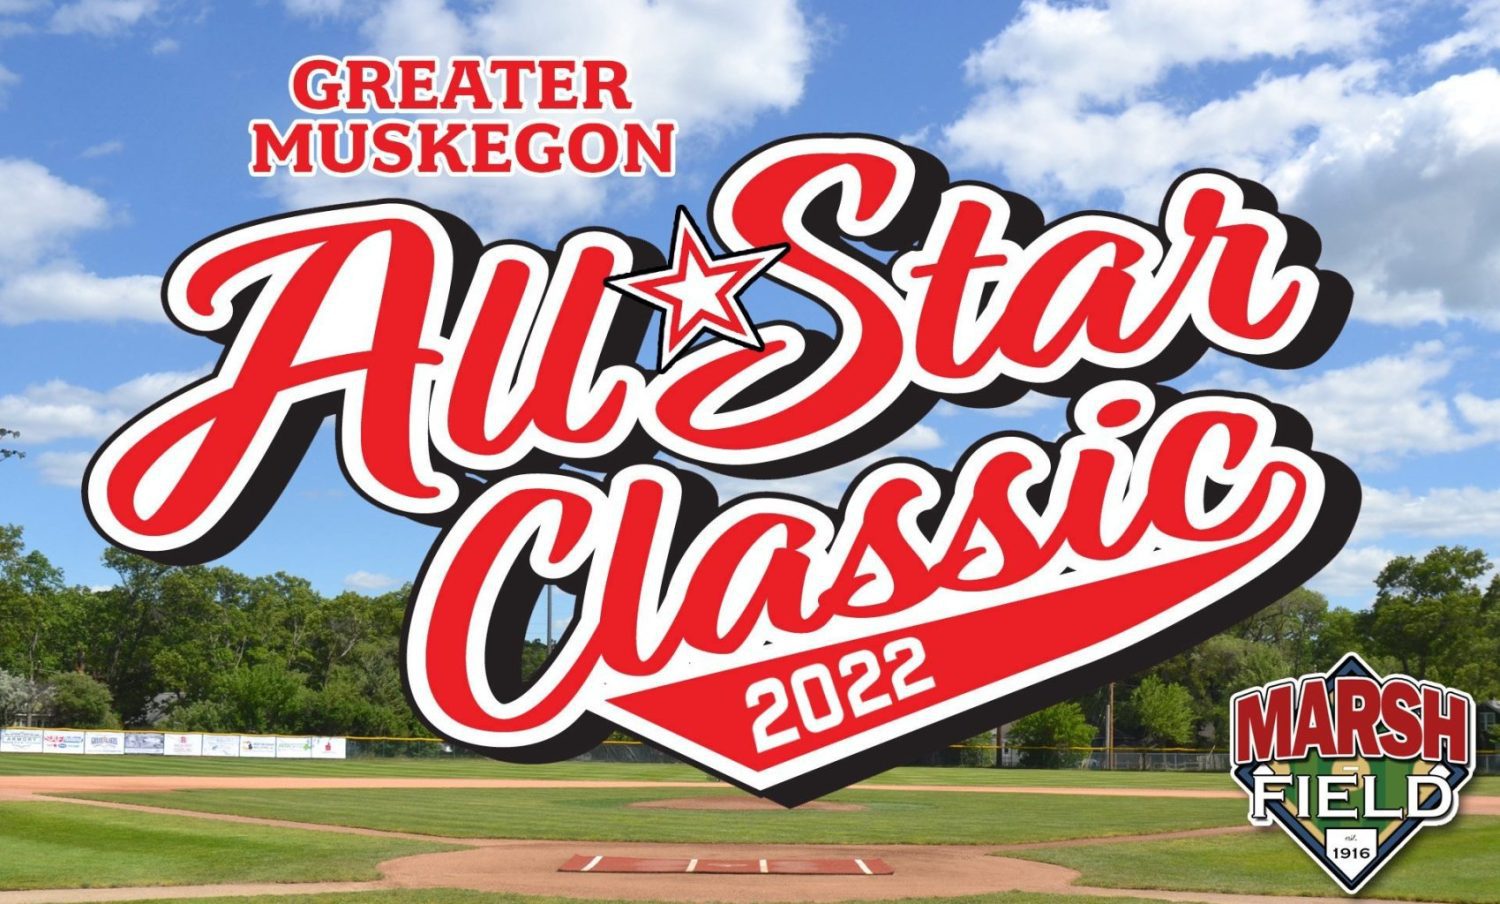 Big crowd turns out to witness Greater Muskegon All Star Classic at Marsh Field